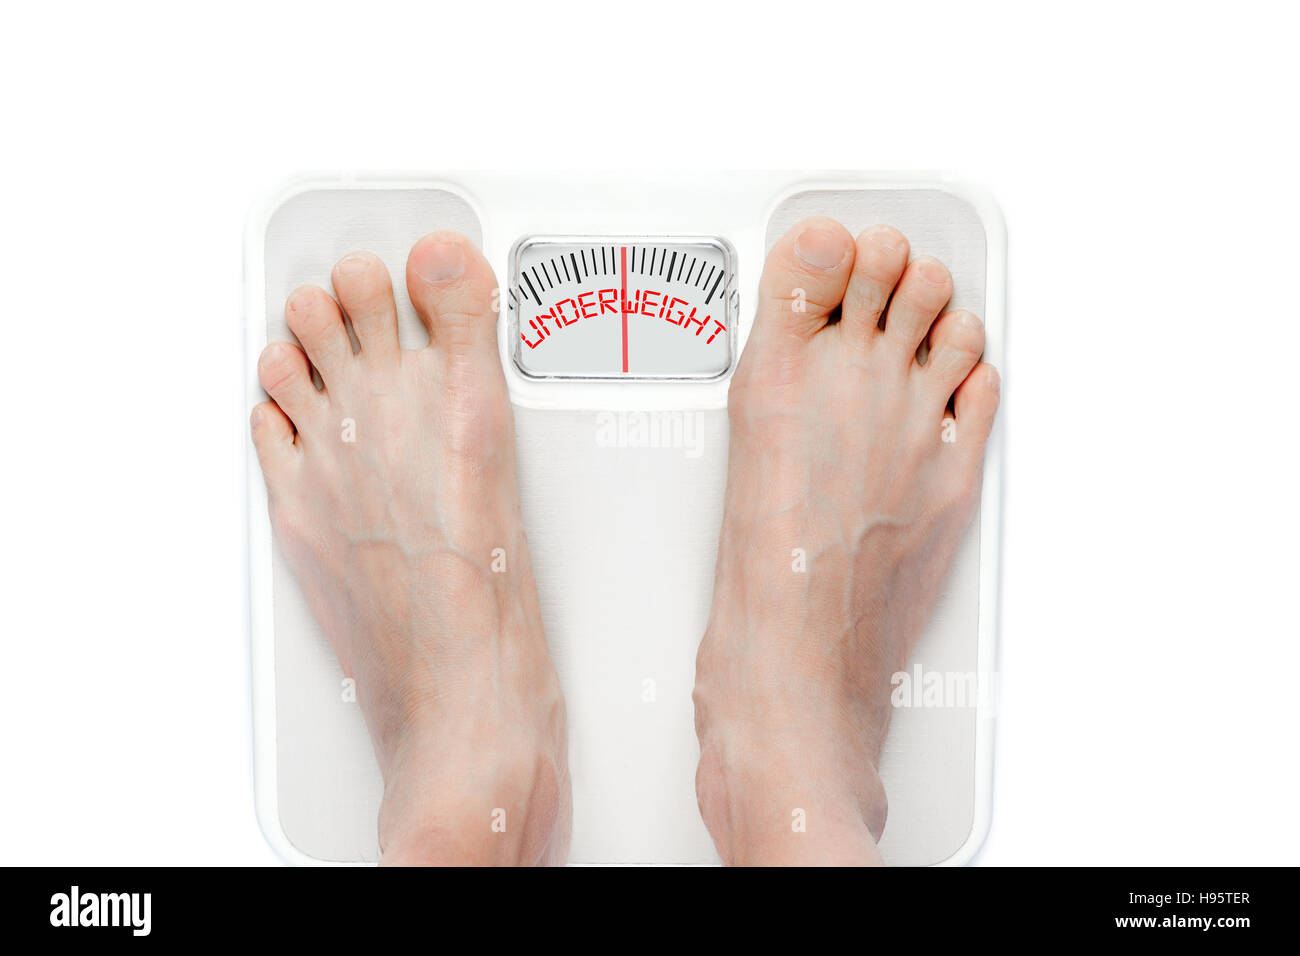 Feet on mechanical bathroom scale with the word UNDERWEIGHT on screen. Signifies eating disorder problems requiring proper treatment. Stock Photo